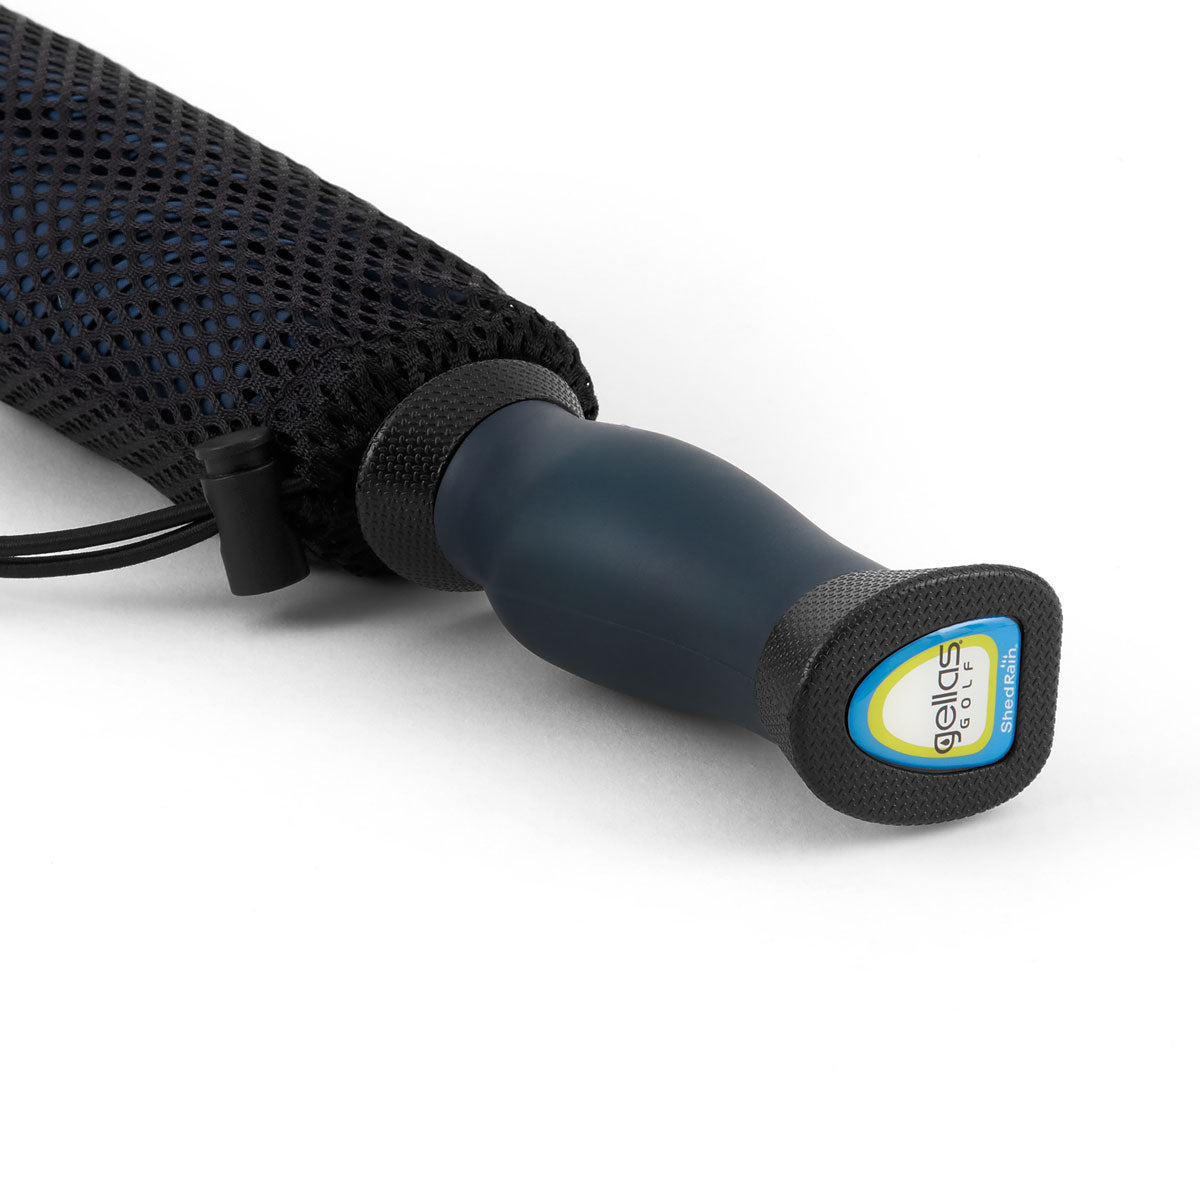 Close up image of a navy blue Gellas gel-filled cushion grip umbrella handle in its mesh bungee closure travel case 